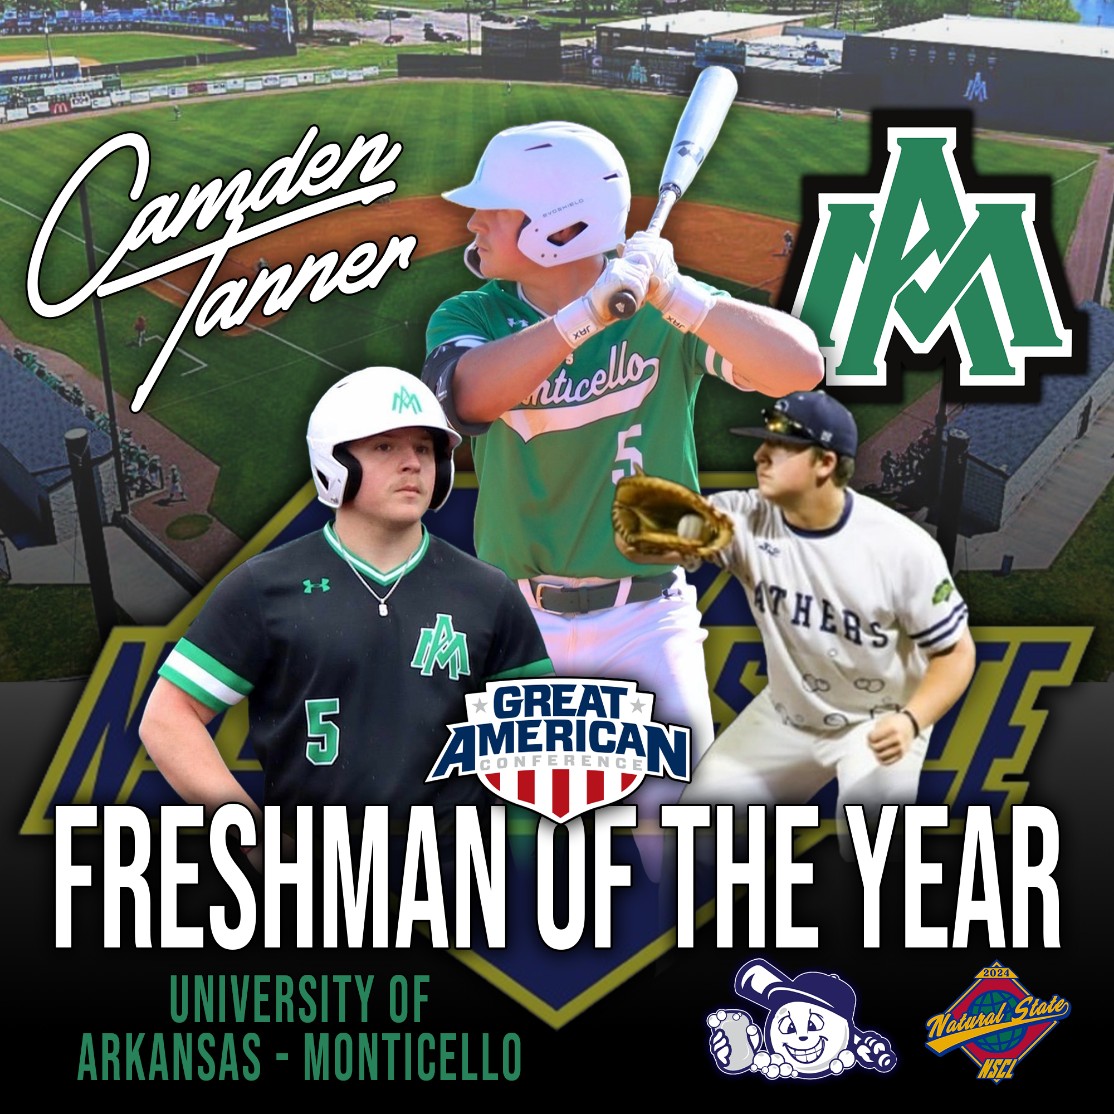 Congratulations to Bathers OF @TannerCamden on being named the @GACAthletics Freshman of the Year. Camden had a huge year, hitting .433 with 1️⃣4️⃣ doubles, 1️⃣3️⃣ homeruns, & 42 RBI for @weevilsbaseball, & will be back with the defending champions at @MajesticParkHS. #TheNatural